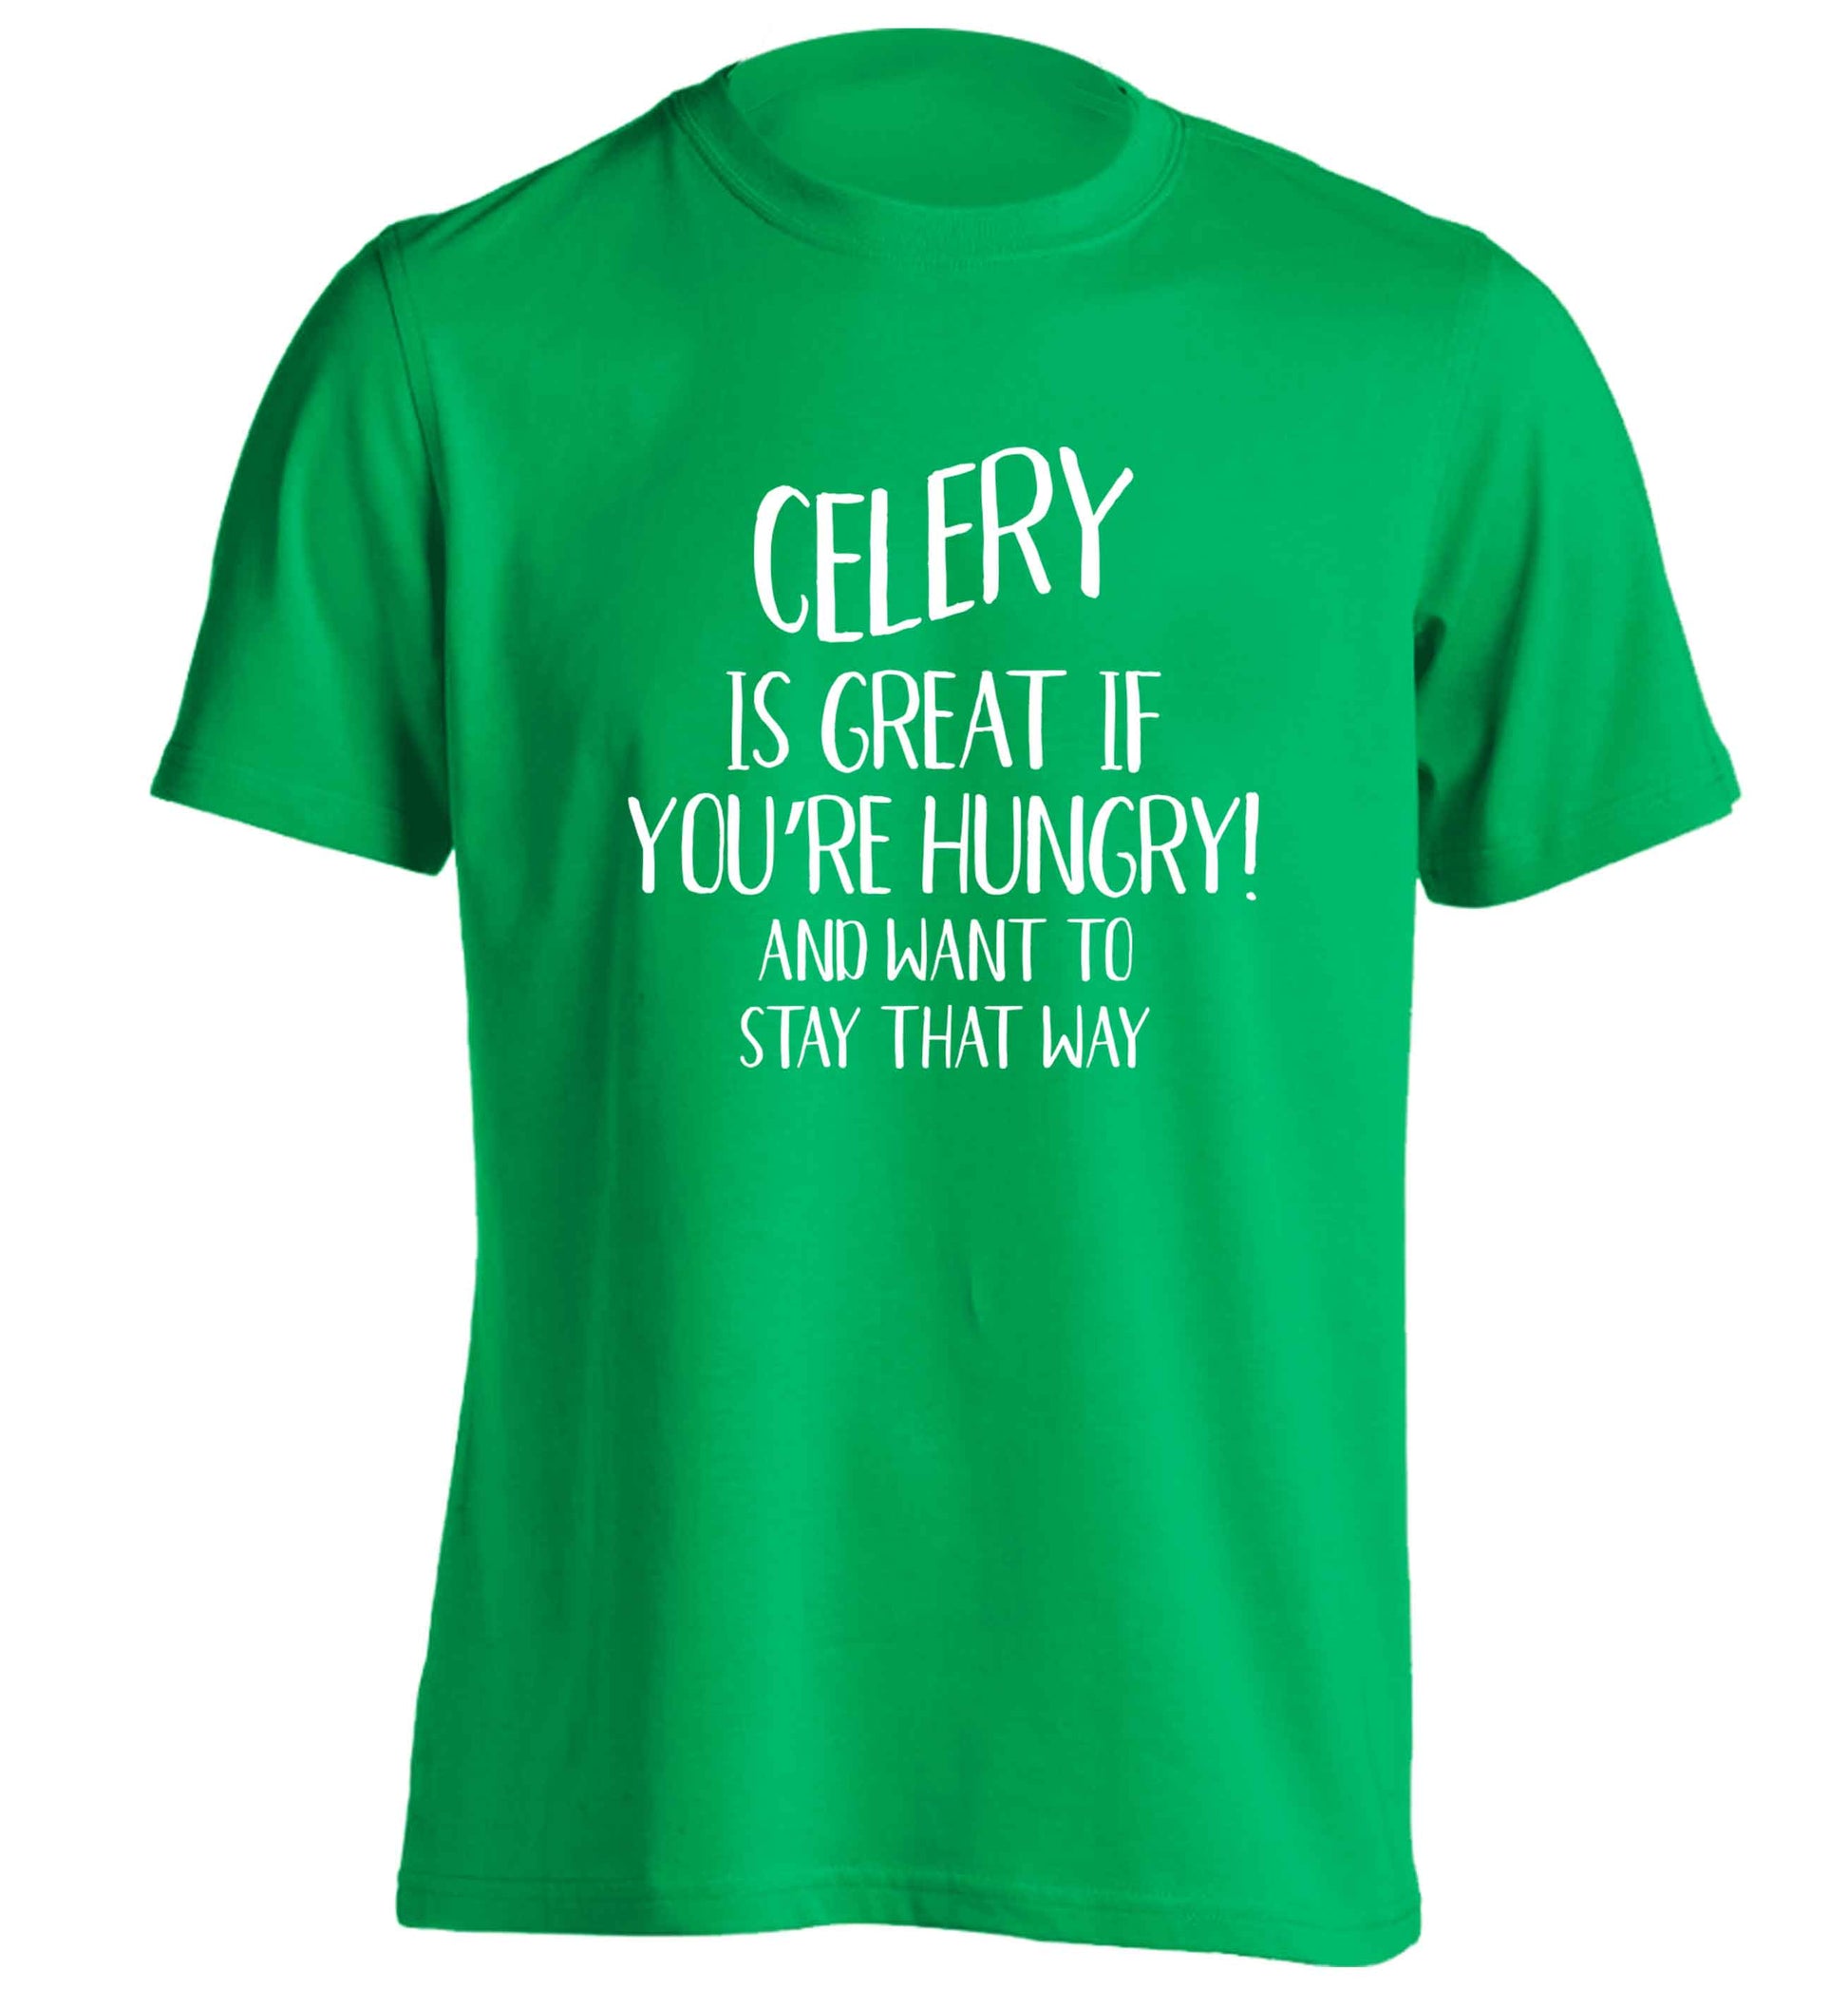 Cellery is great when you're hungry and want to stay that way adults unisex green Tshirt 2XL